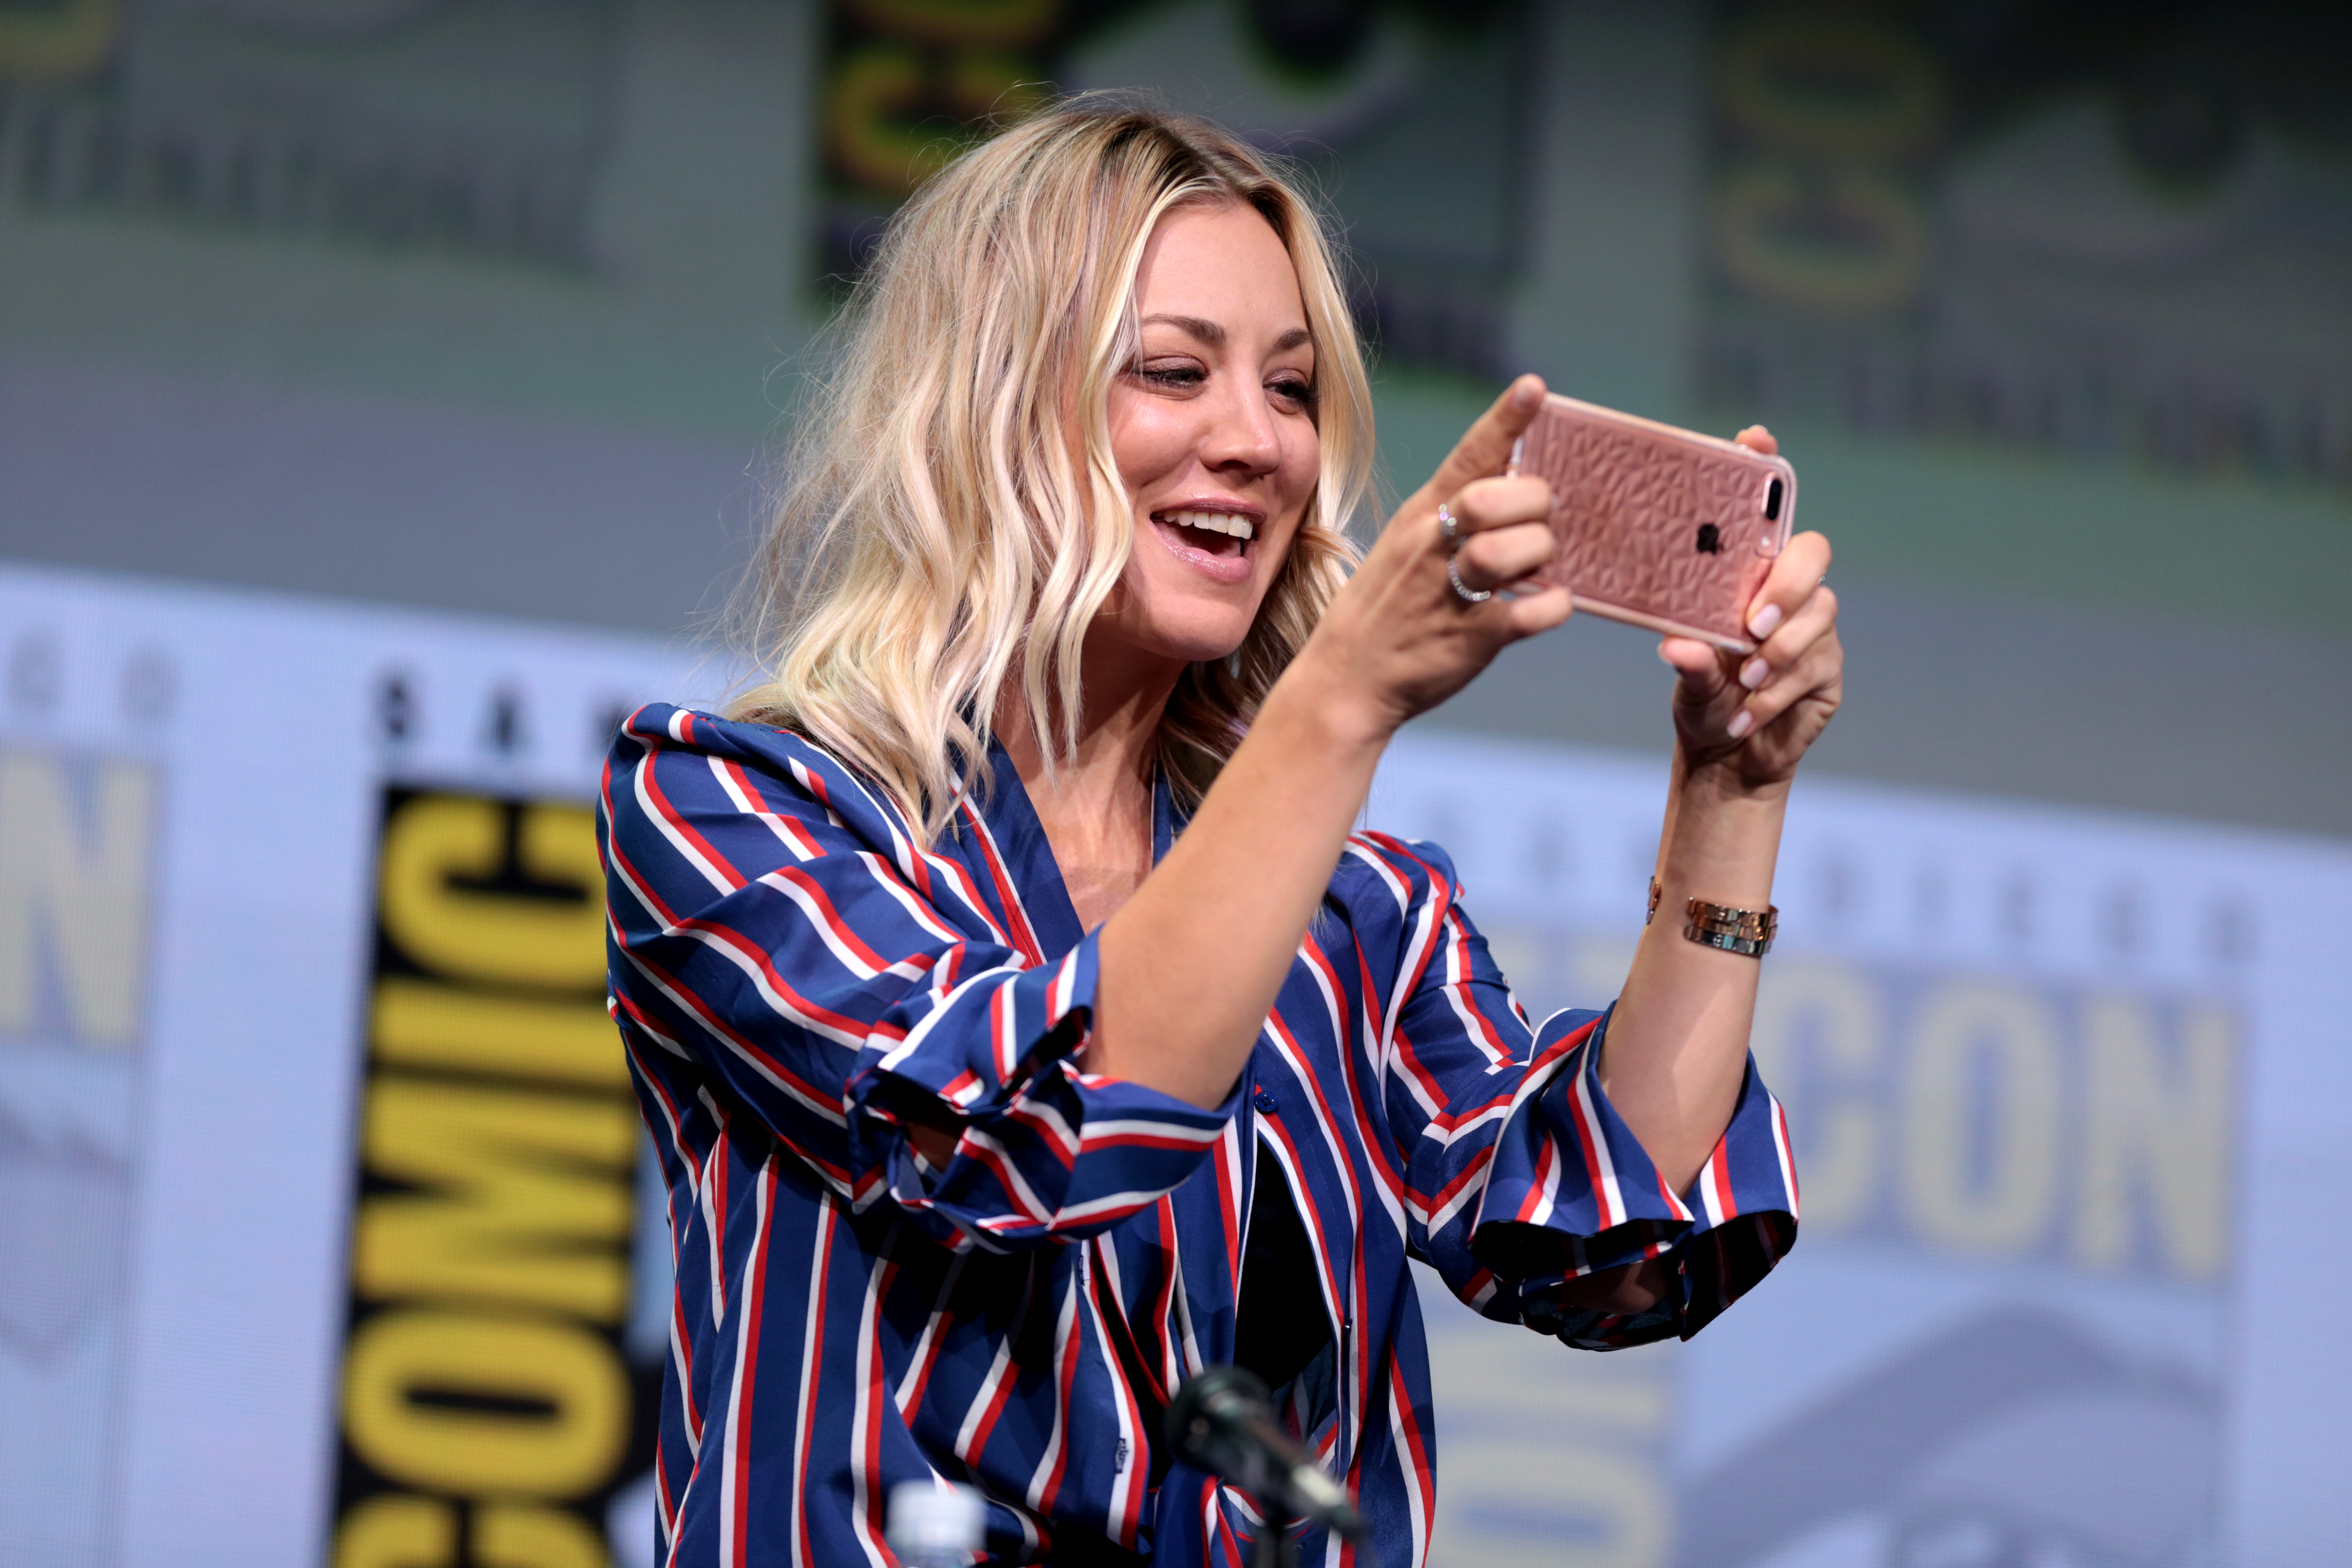 Kaley Cuoco ©Gage Skidmore from Peoria, AZ, United States of America, CC BY-SA 2.0 <https://creativecommons.org/licenses/by-sa/2.0>, via Wikimedia Commons